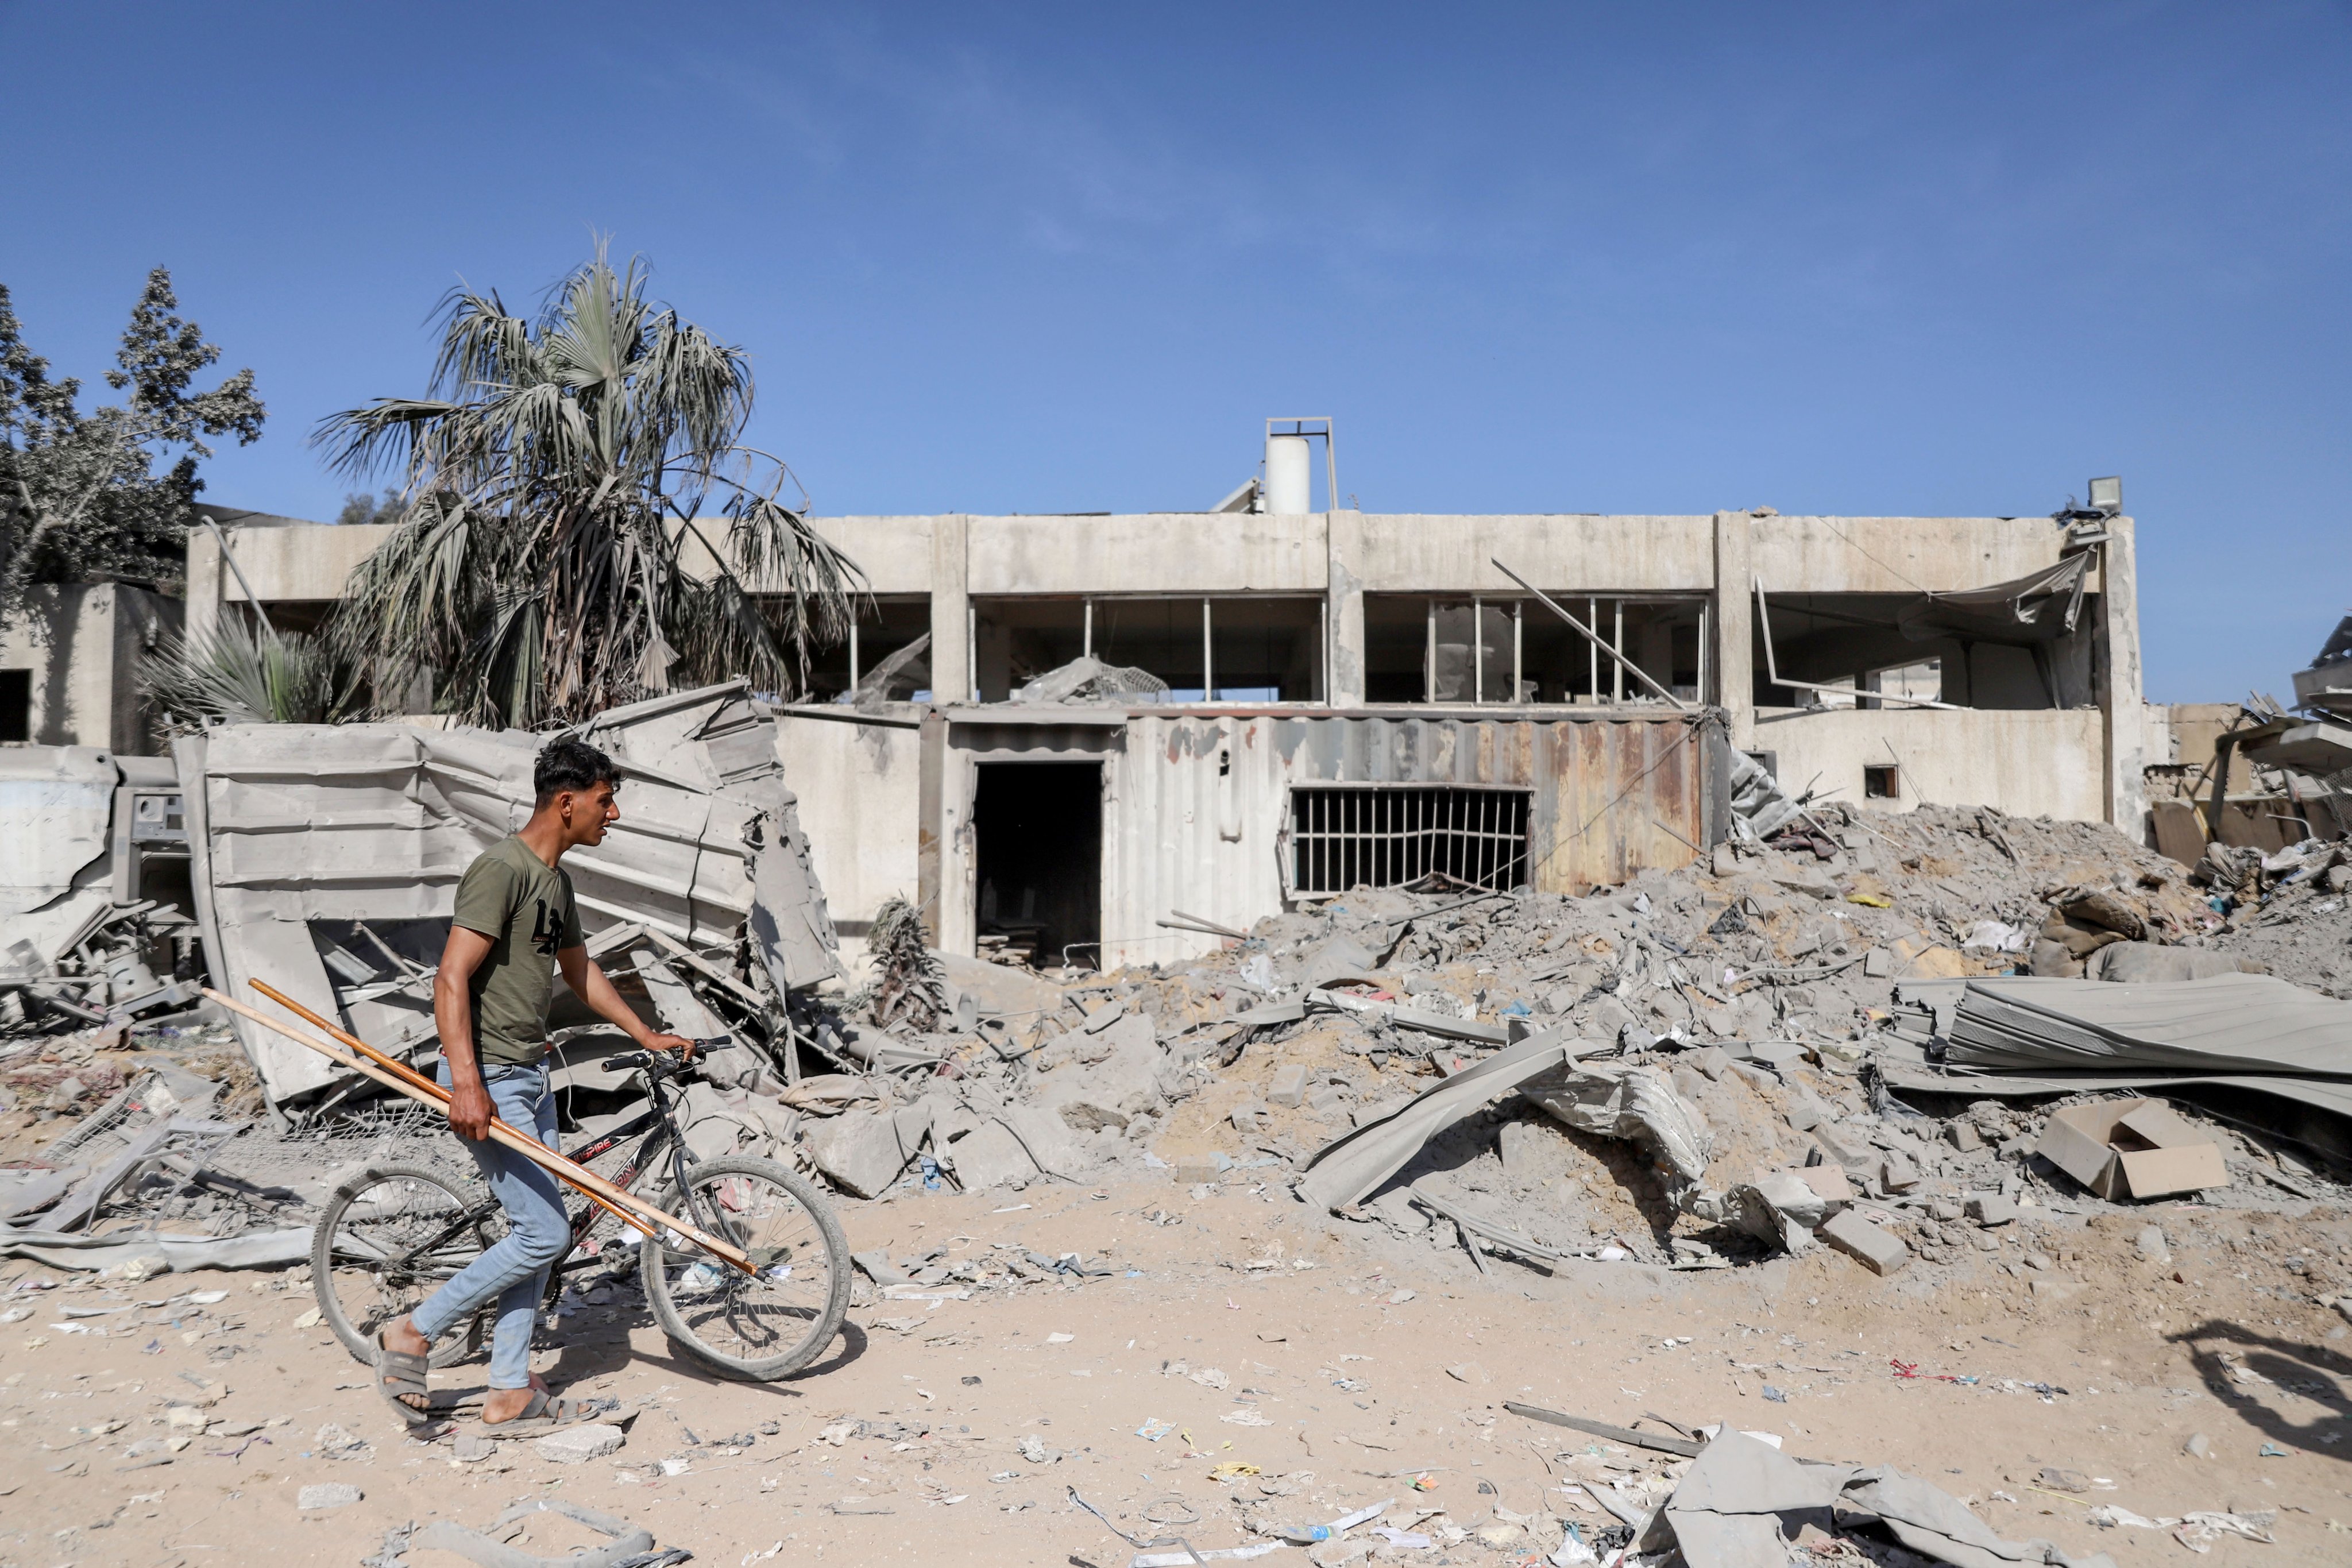 A Palestinian walks past al-Shifa Hospital in Gaza City on Monday after the Israeli army withdrew from the building following a two-week military operation. Photo: EPA-EFE